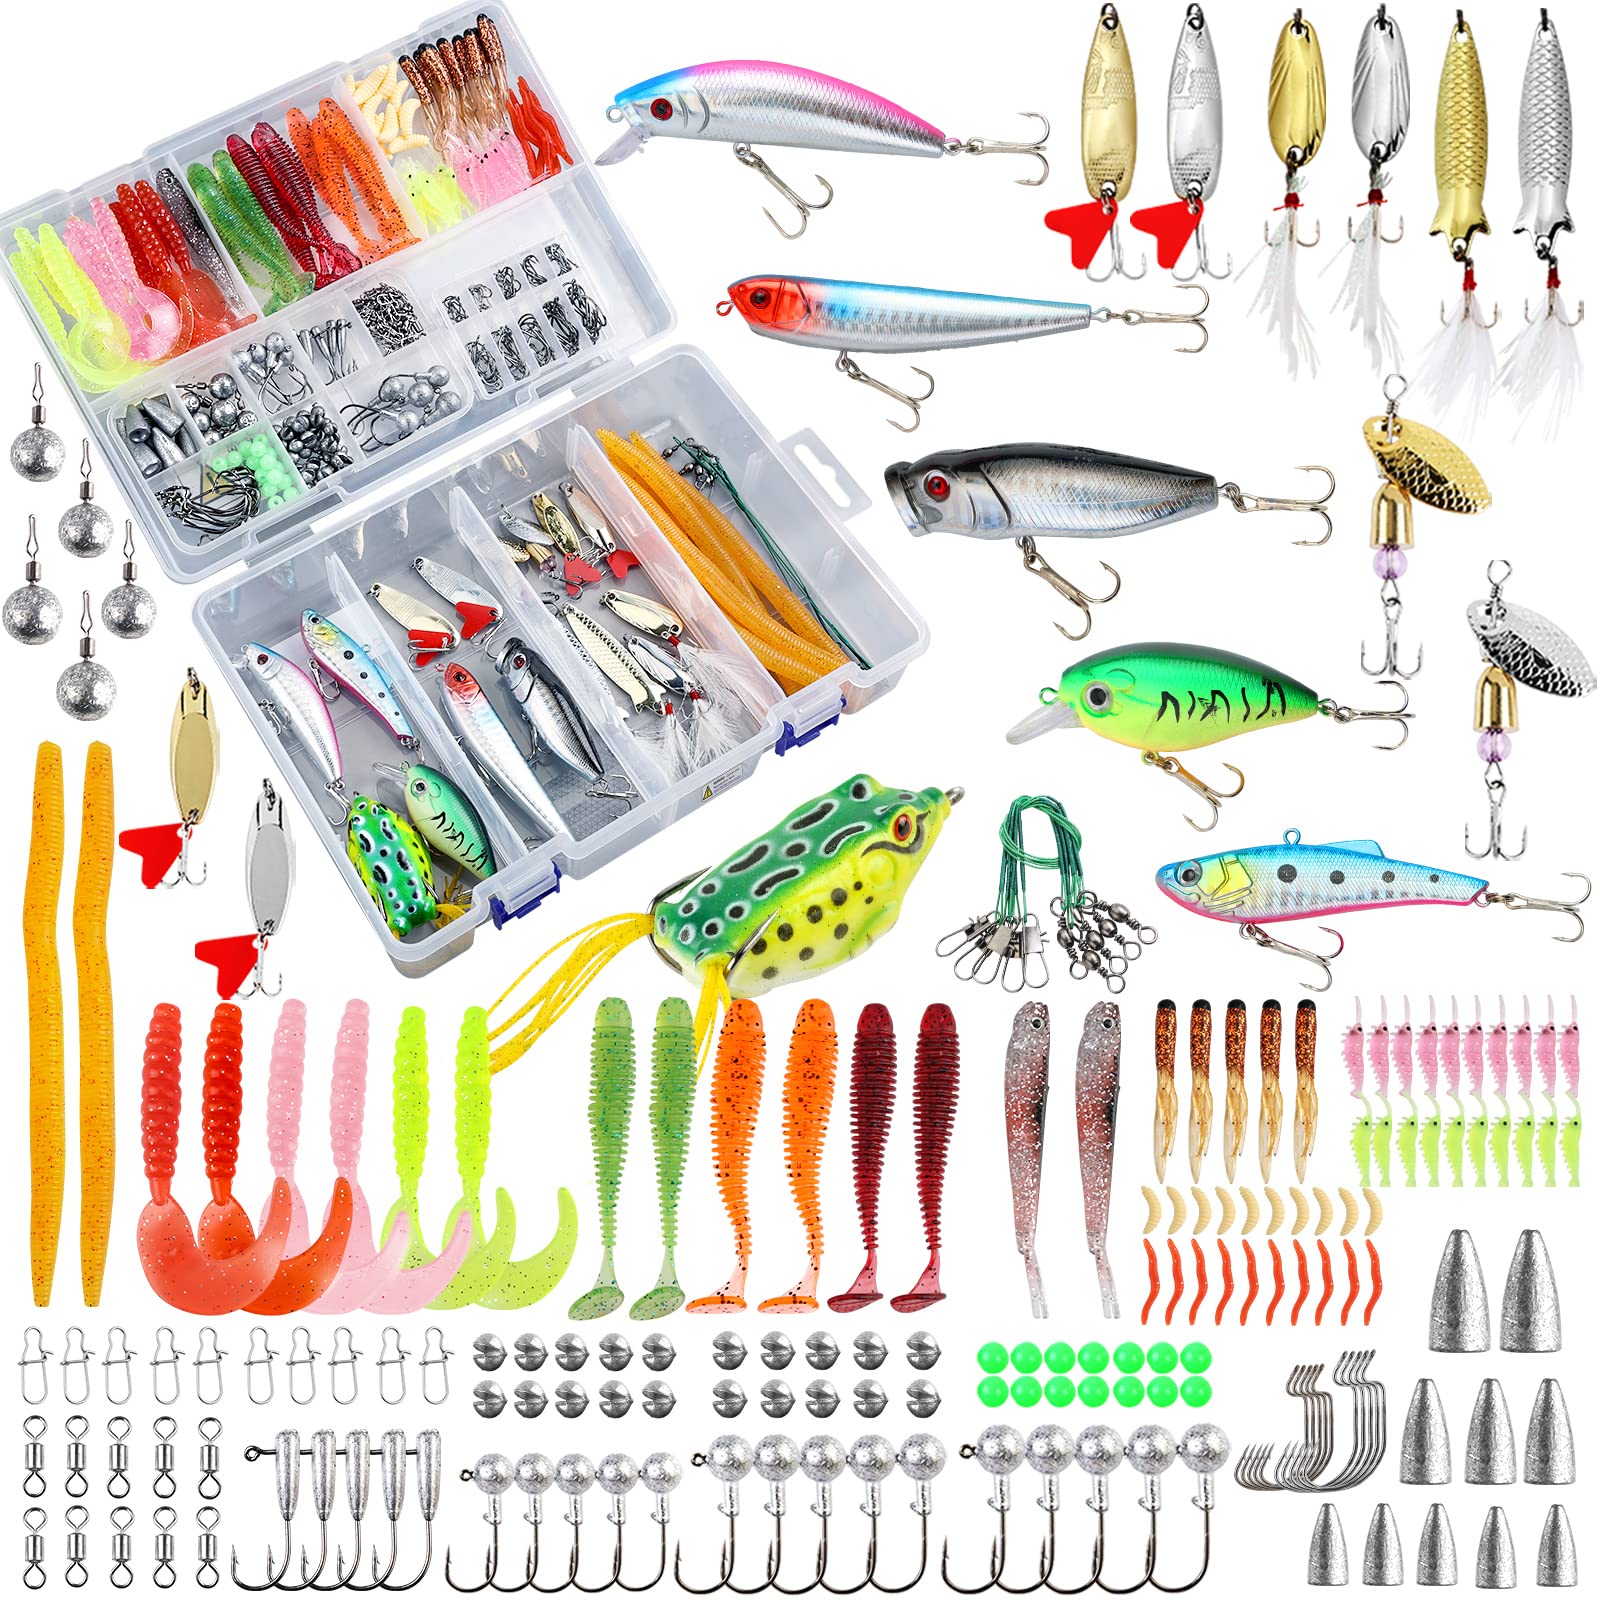 TCMBY 327PCS Fishing Lure Tackle Bait Kit Set for Freshwater Fishing Tackle  Box with Tackle Included